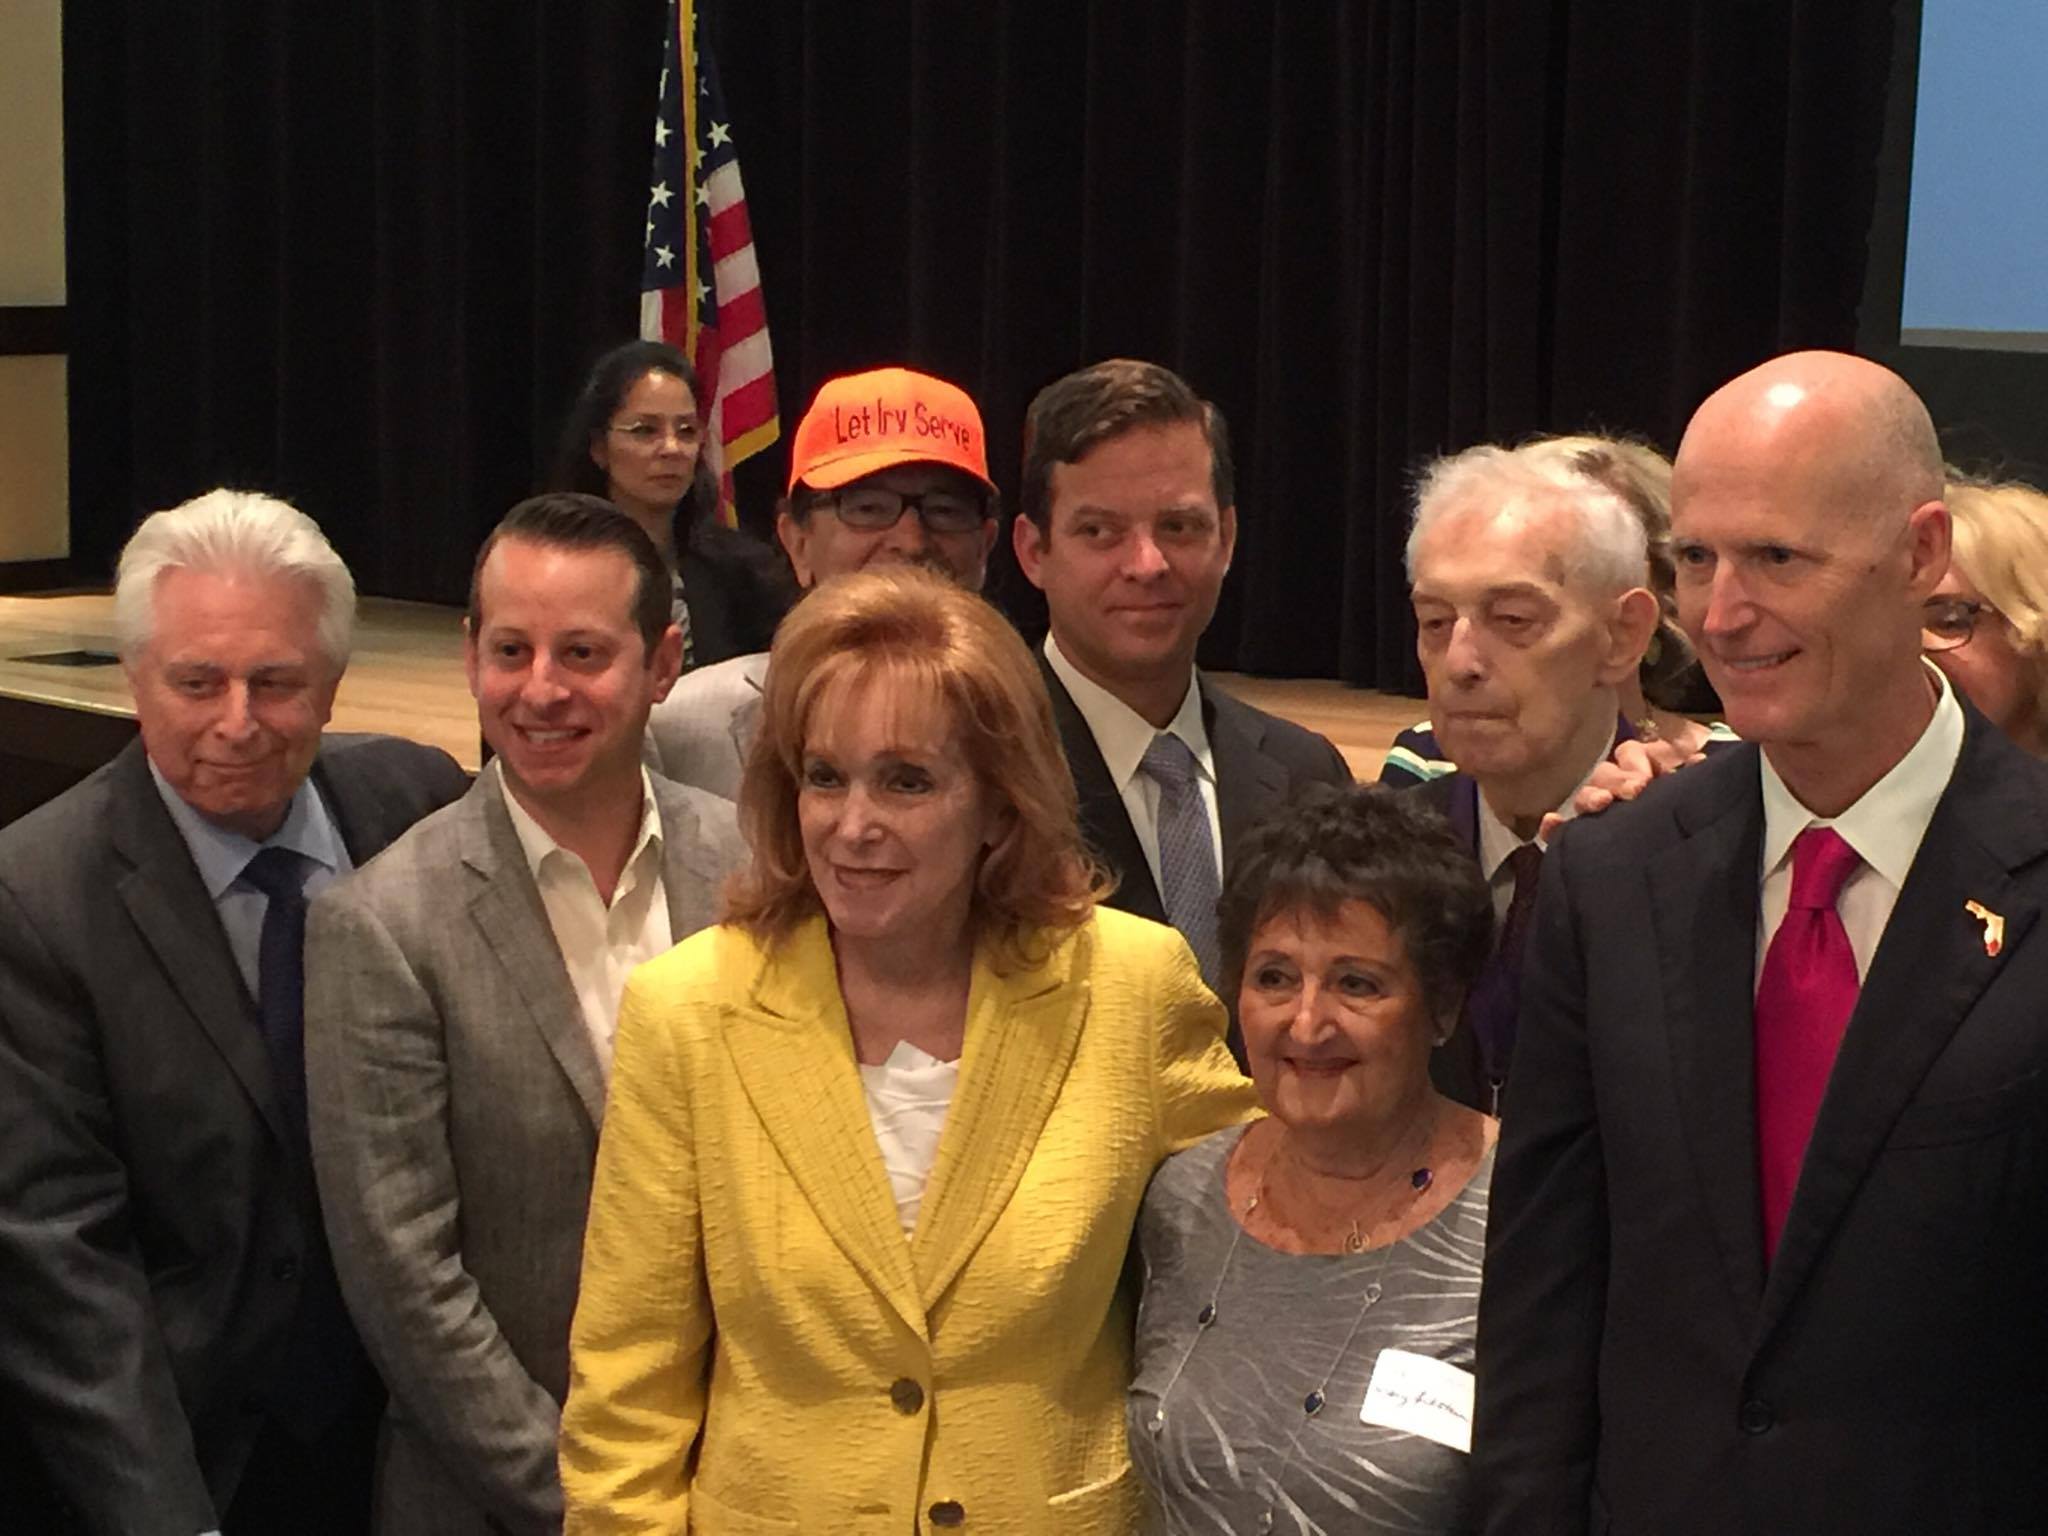 Governor Rick Scott with Senator Sobel and Rep Moskowitz along with members of the Jewish Federation.